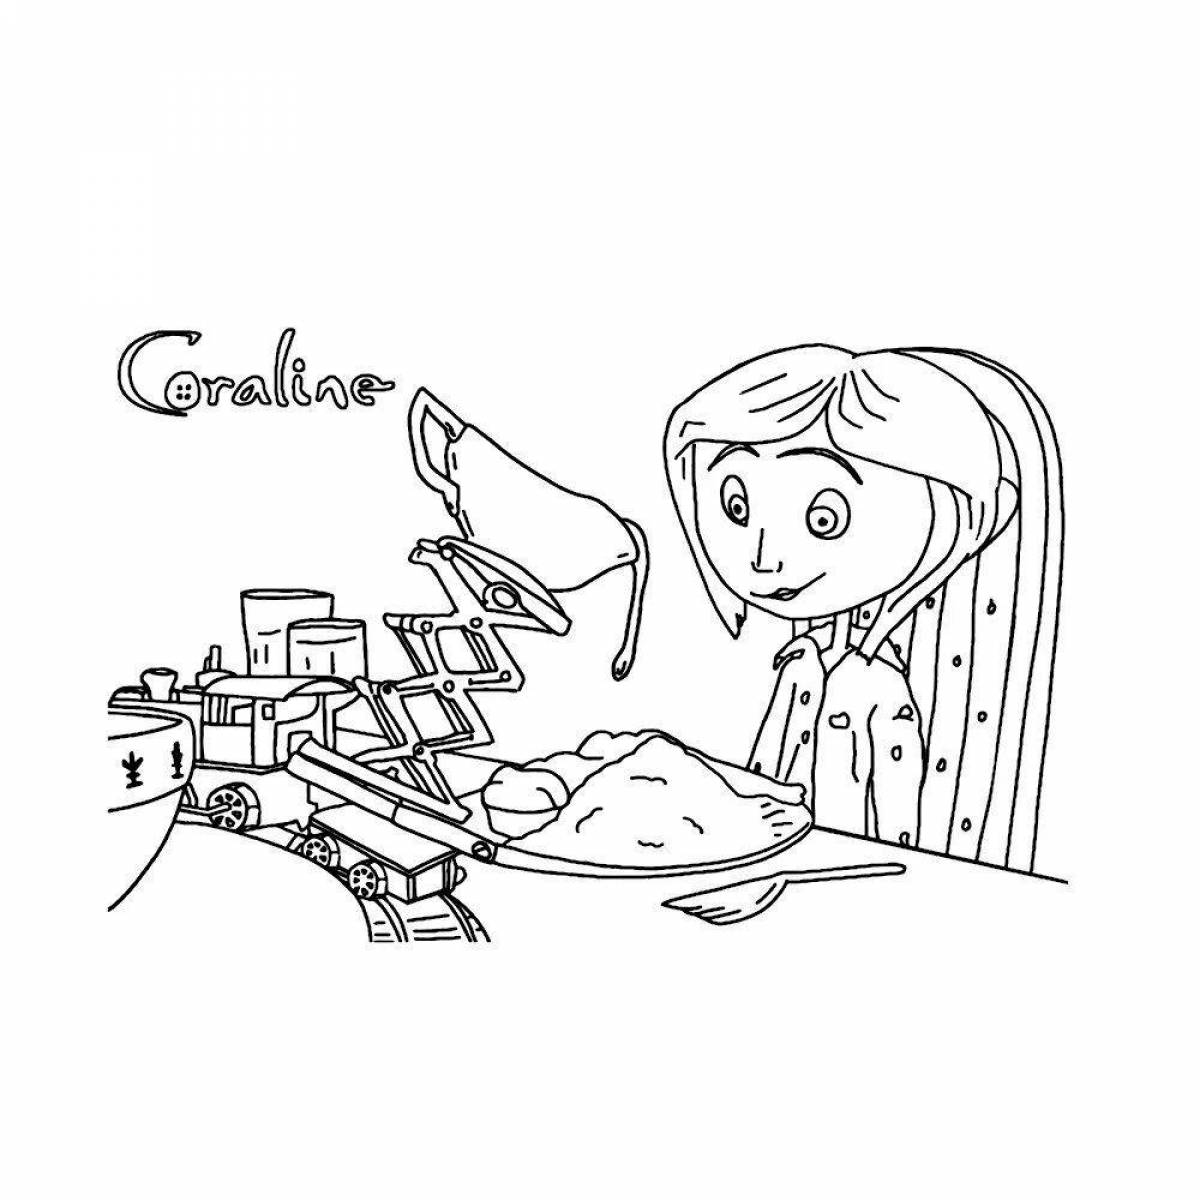 Coraline's amazing coloring page